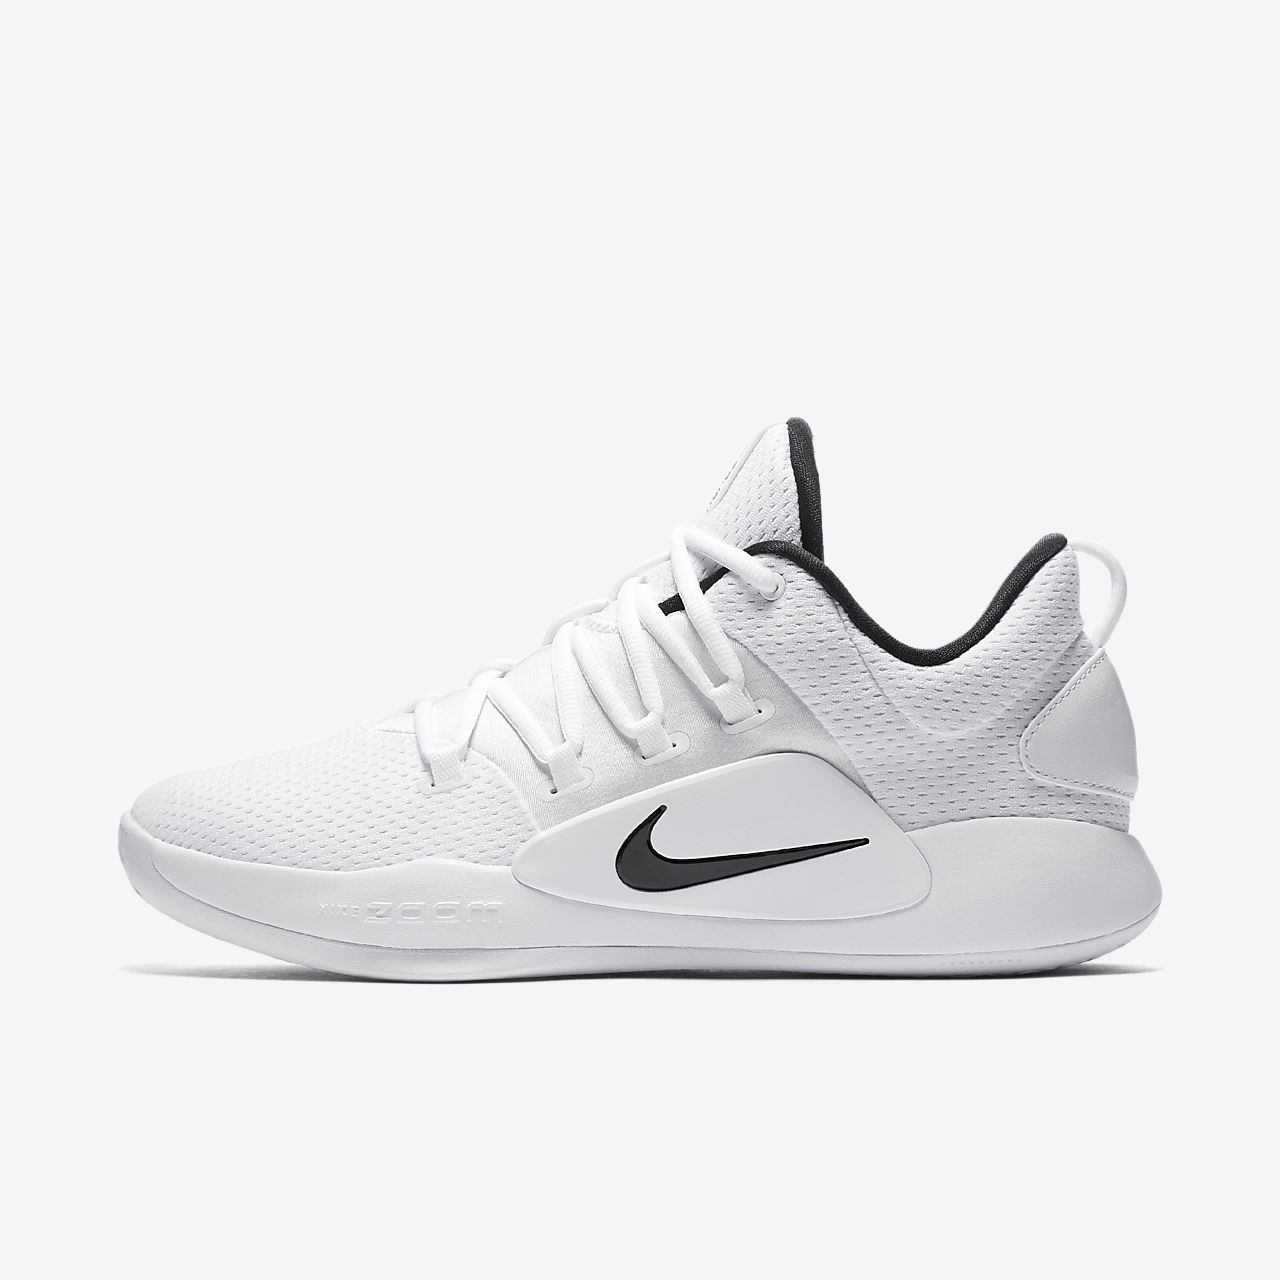 white nike low top basketball shoes 